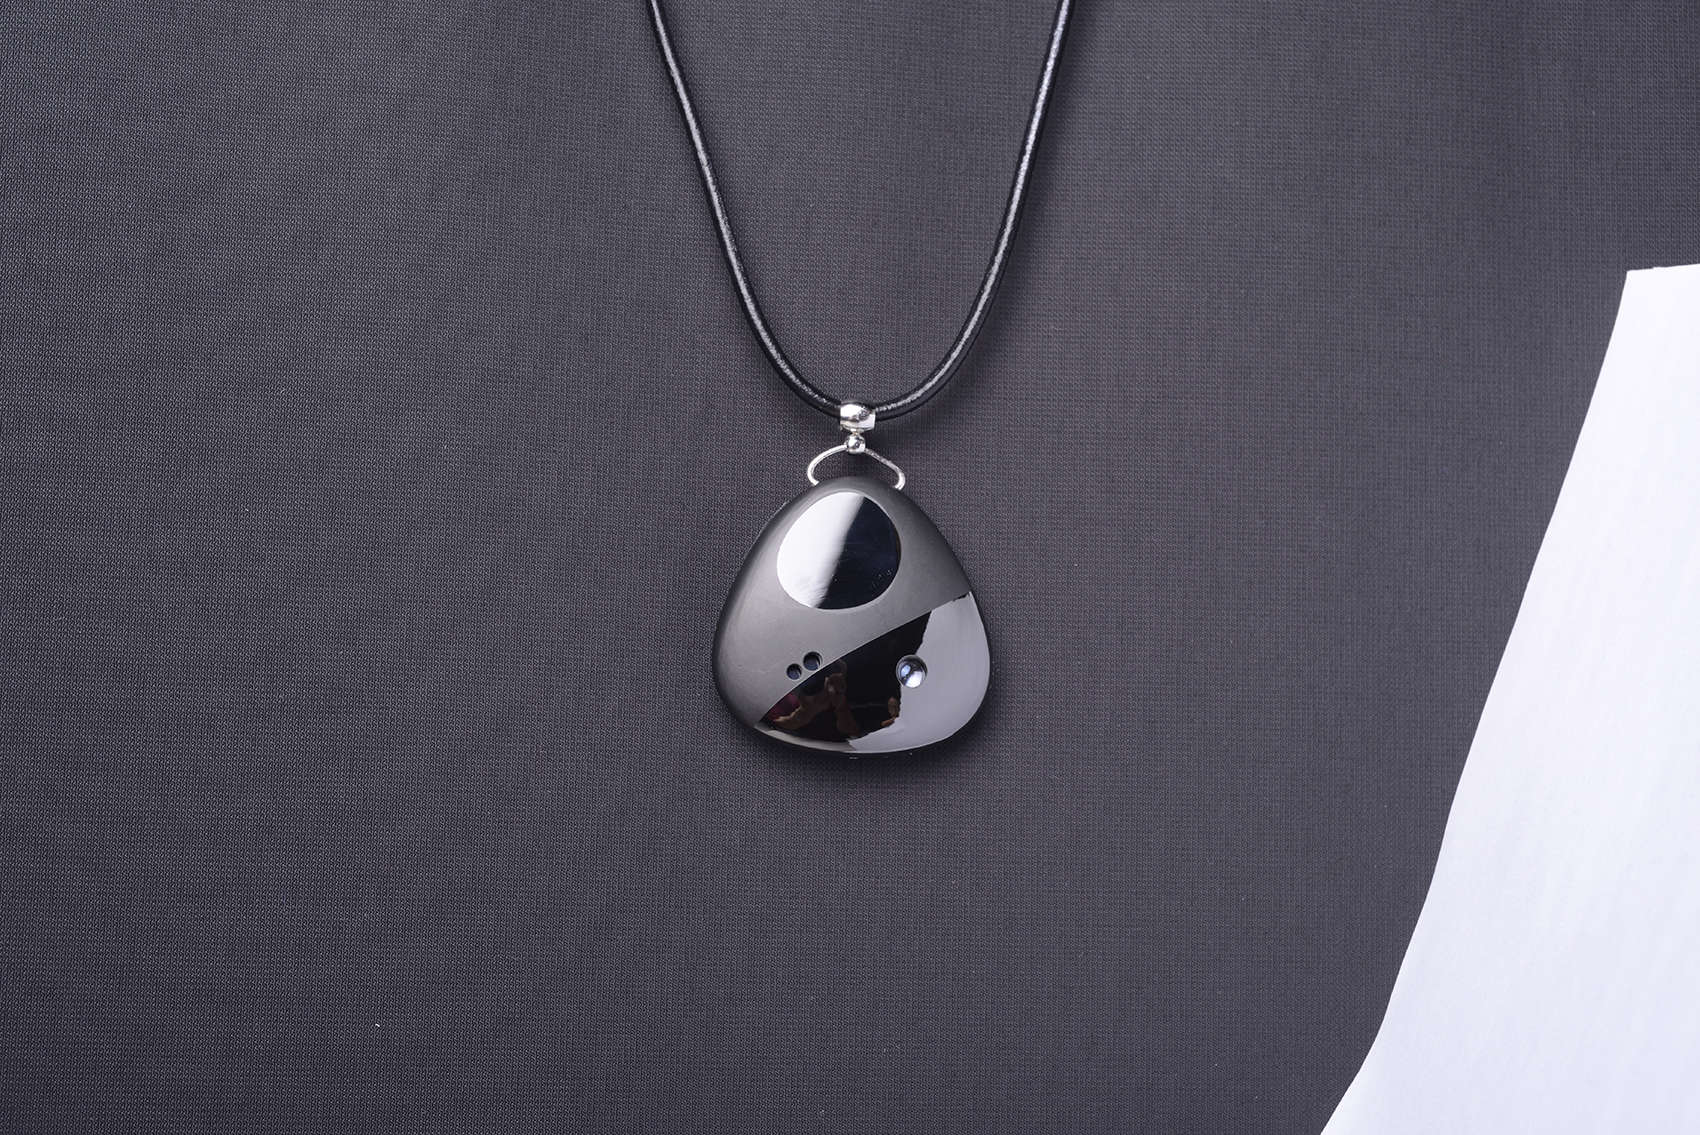 The Miragii pendant can project messages onto your hand and stores an earpiece for calls or music.